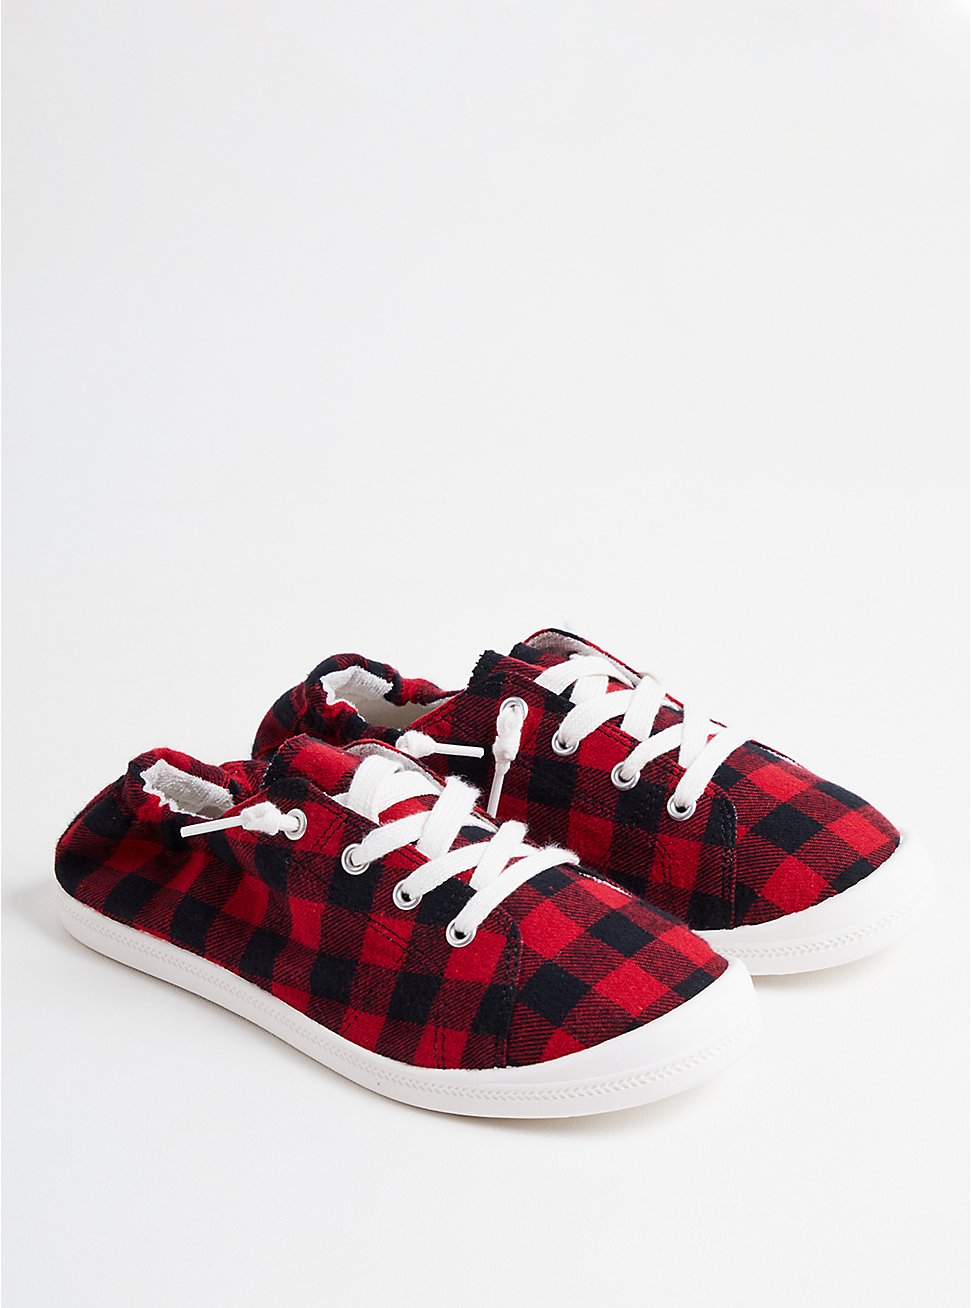 Plus Size Riley Ruched Sneaker (WW), RED PLAID, hi-res